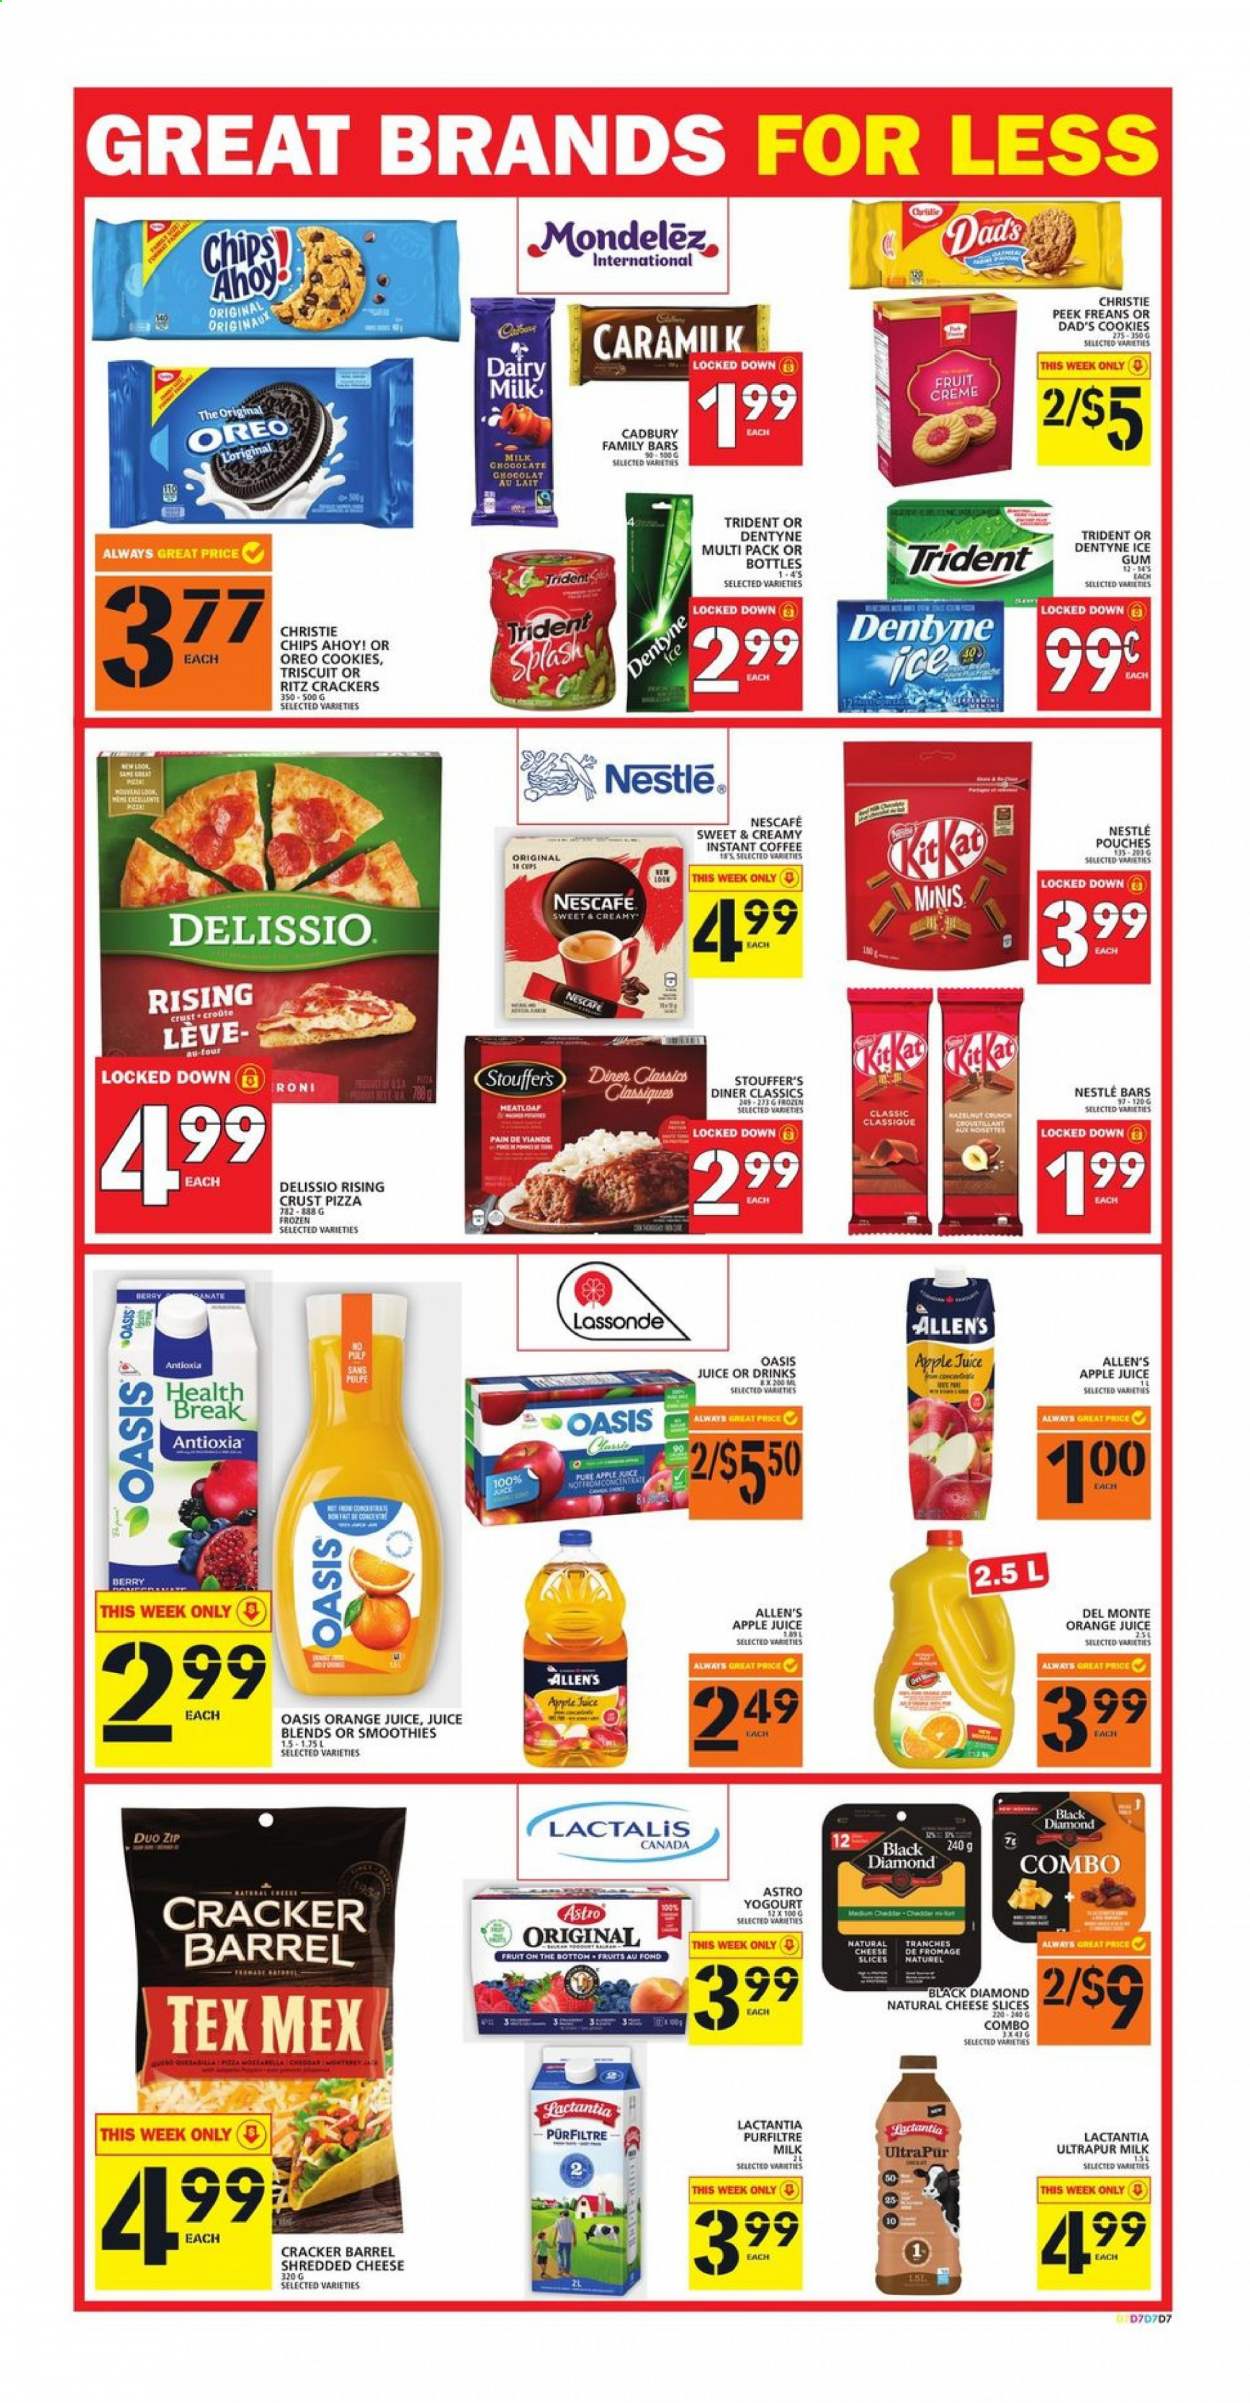 thumbnail - Food Basics Flyer - April 22, 2021 - April 28, 2021 - Sales products - pizza, shredded cheese, sliced cheese, Oreo, Stouffer's, cookies, crackers, Cadbury, Dairy Milk, Trident, Chips Ahoy!, RITZ, apple juice, orange juice, juice, instant coffee, Nestlé, Nescafé. Page 8.